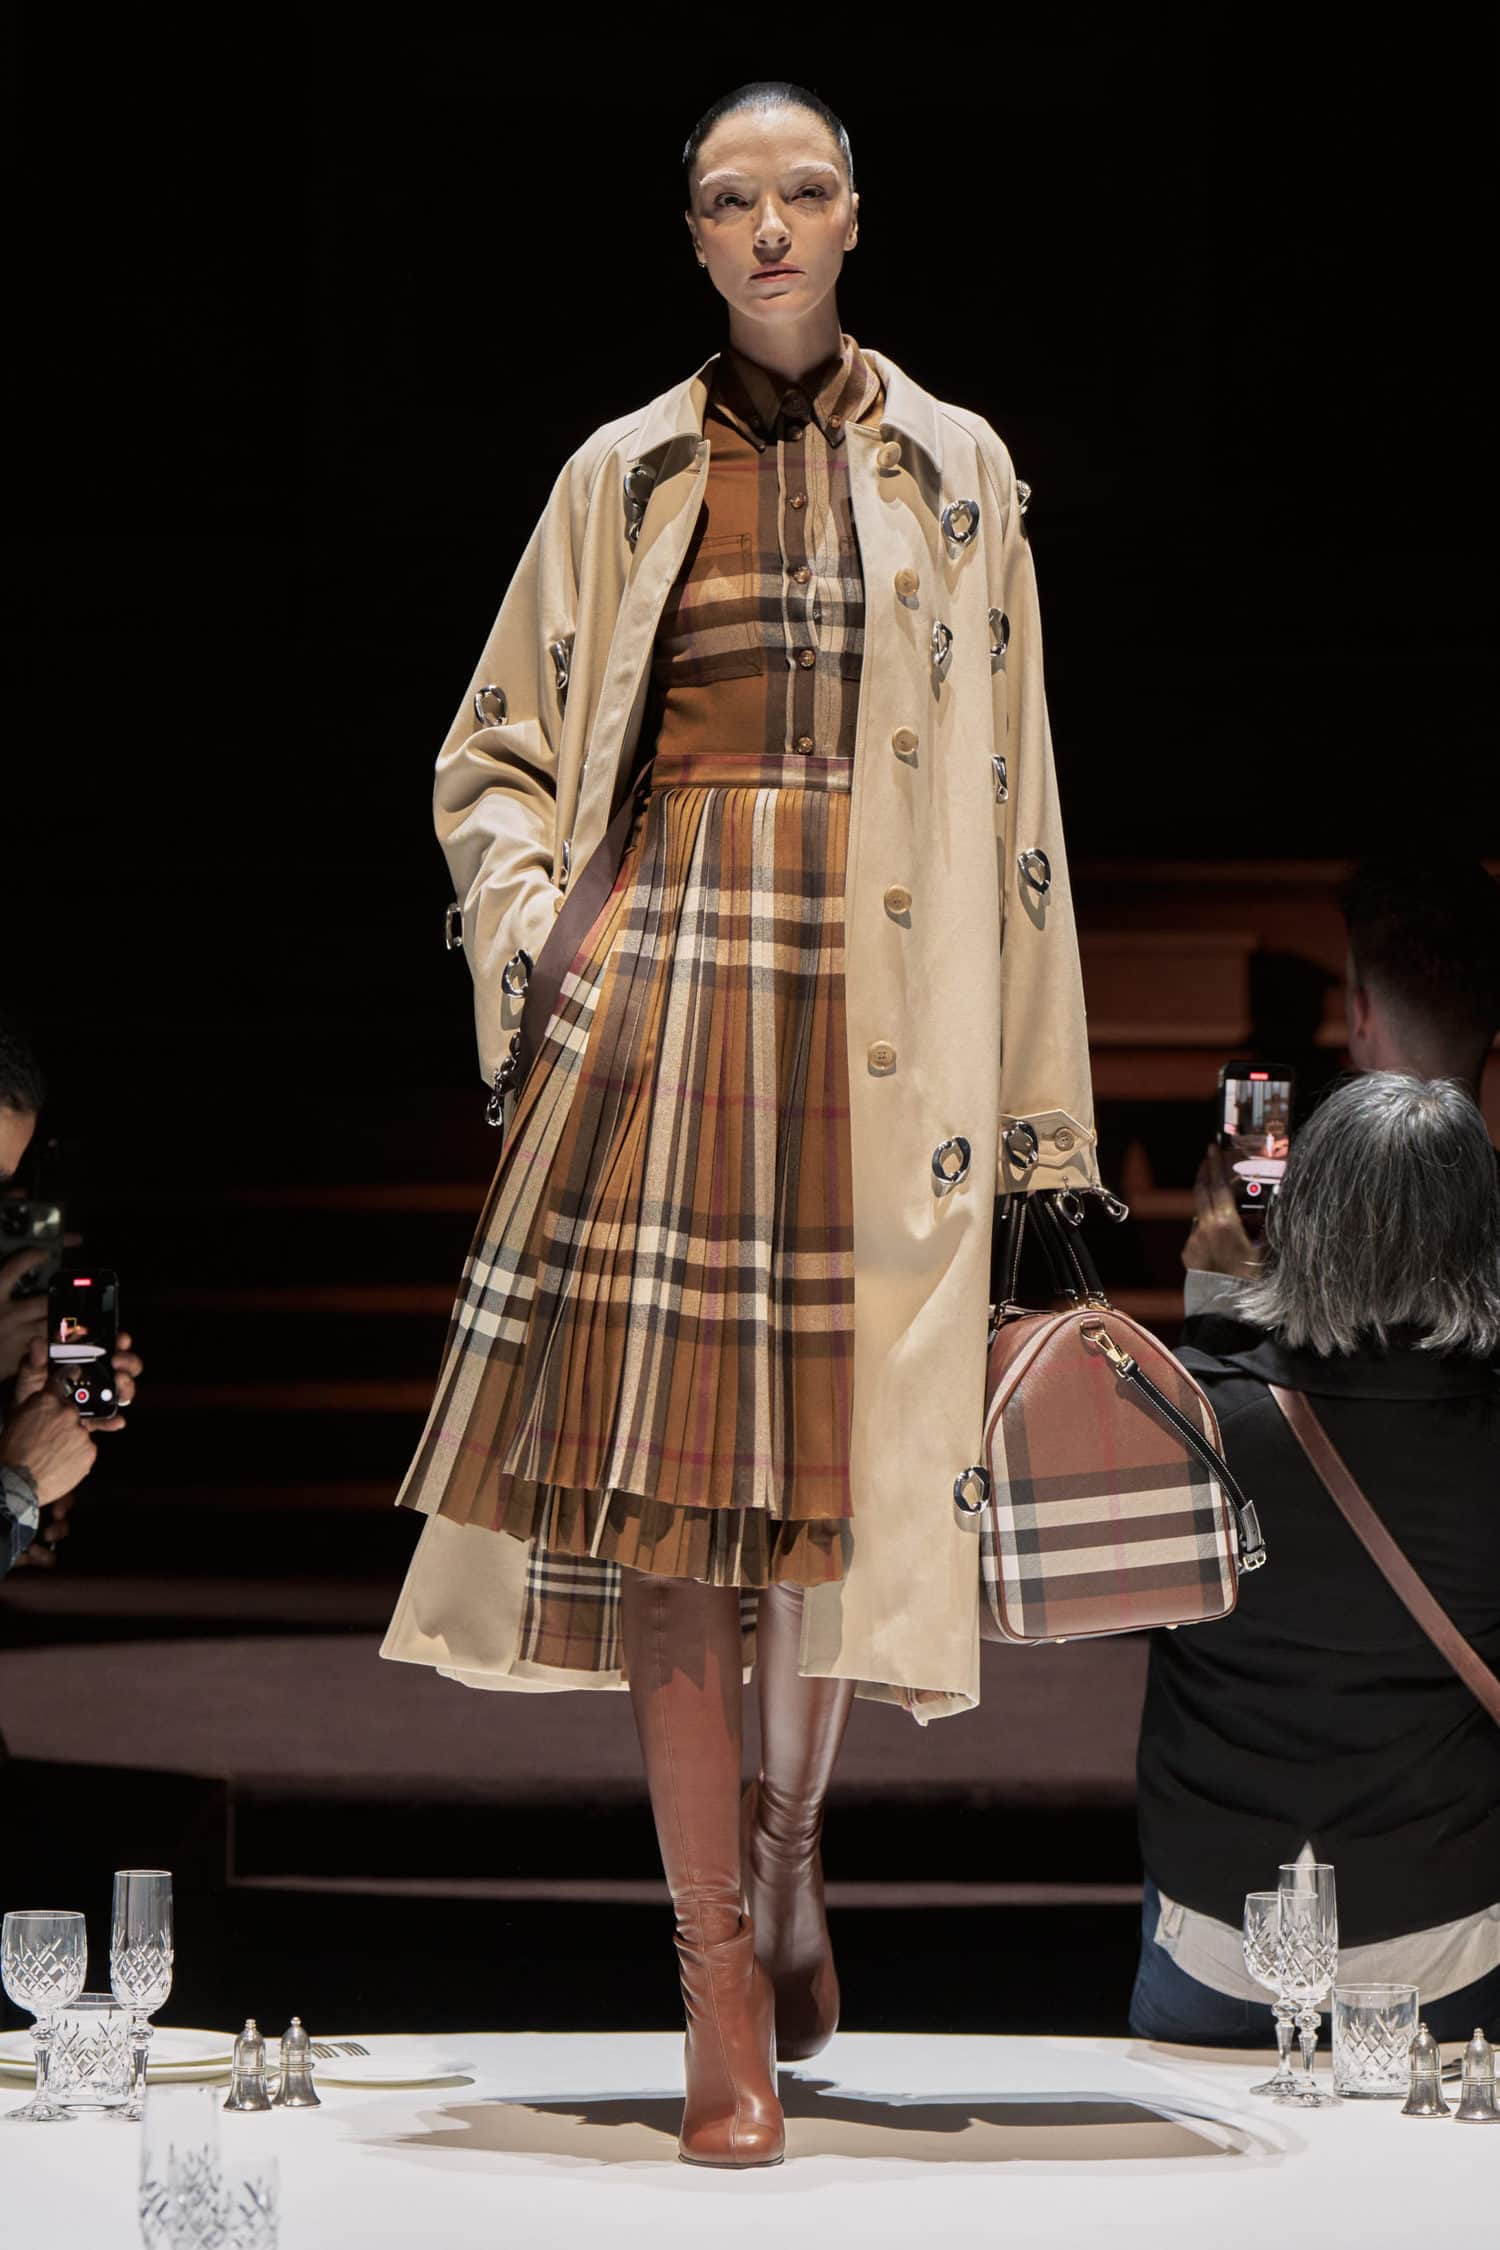 Daily News: Burberry FW '22 Wows (And Brings The Stars Out!) In London,  Loeffer Randall Launches First Wedding Dress, And More! - Daily Front Row